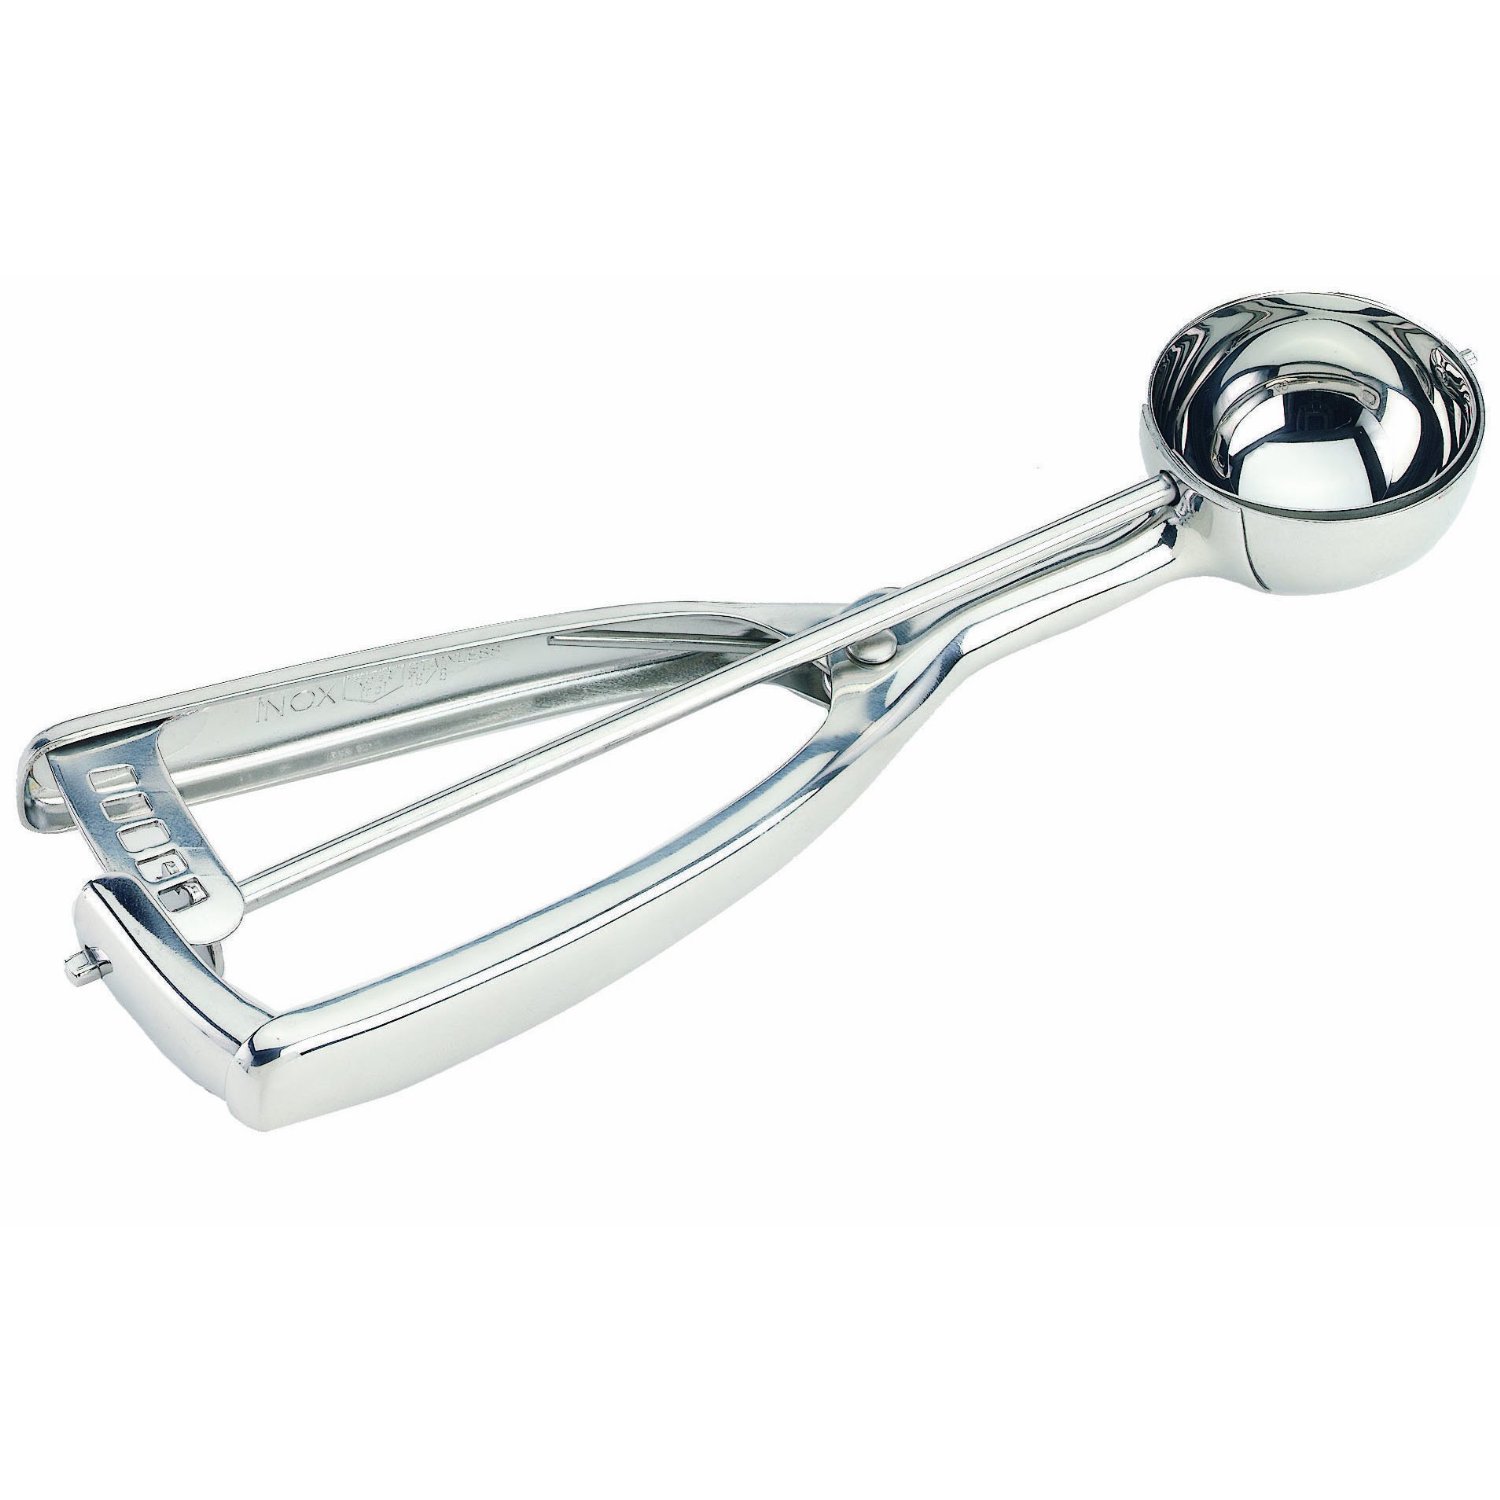 Dss60 Stainless Steel Portion Scoop - 0.6 Oz.